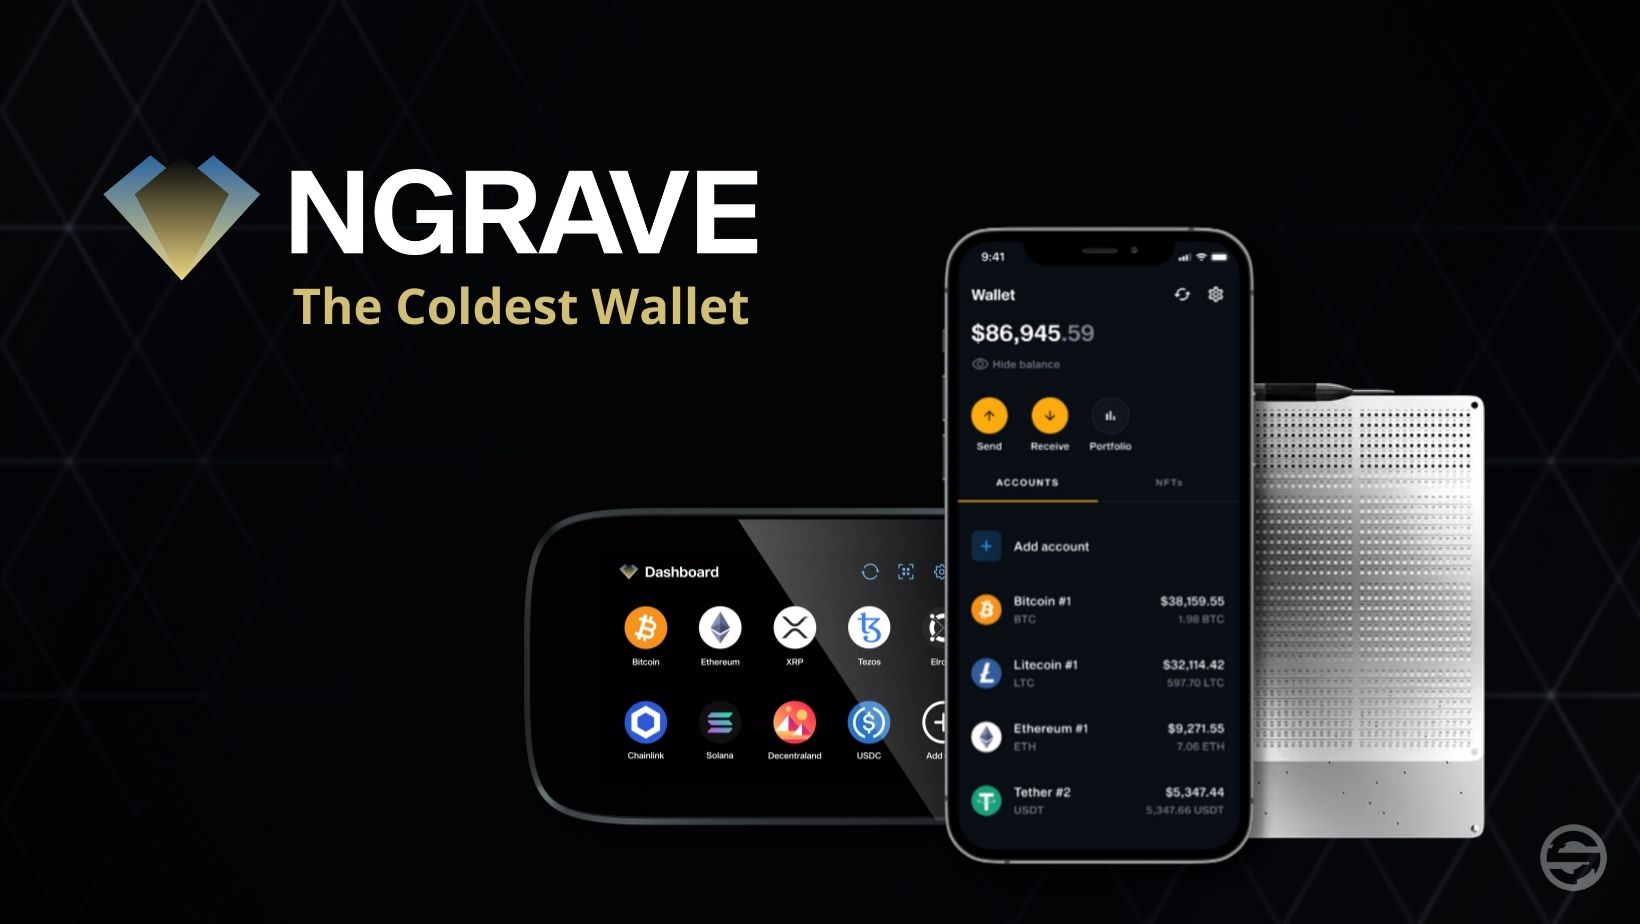 NGRAVE, the solution for securing cryptocurrencies